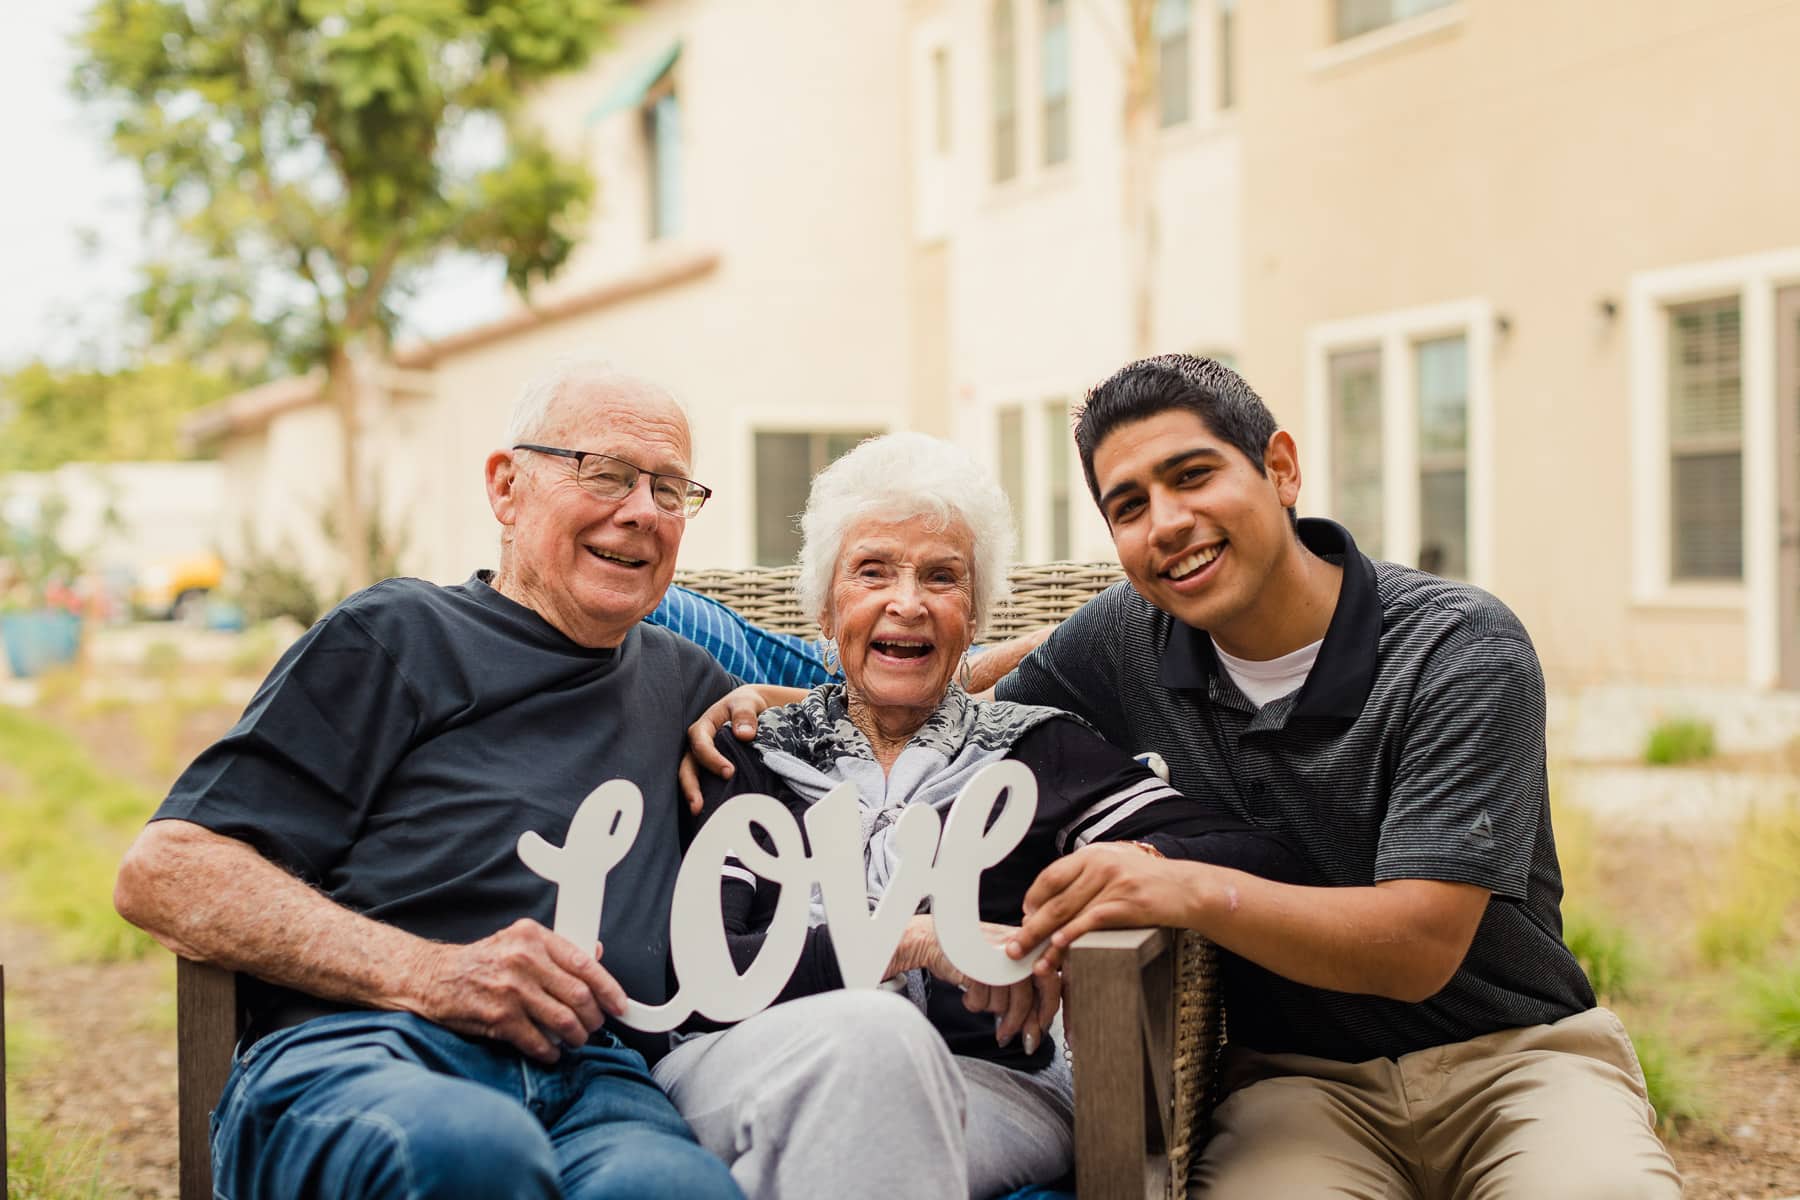 assisted living or in-home care